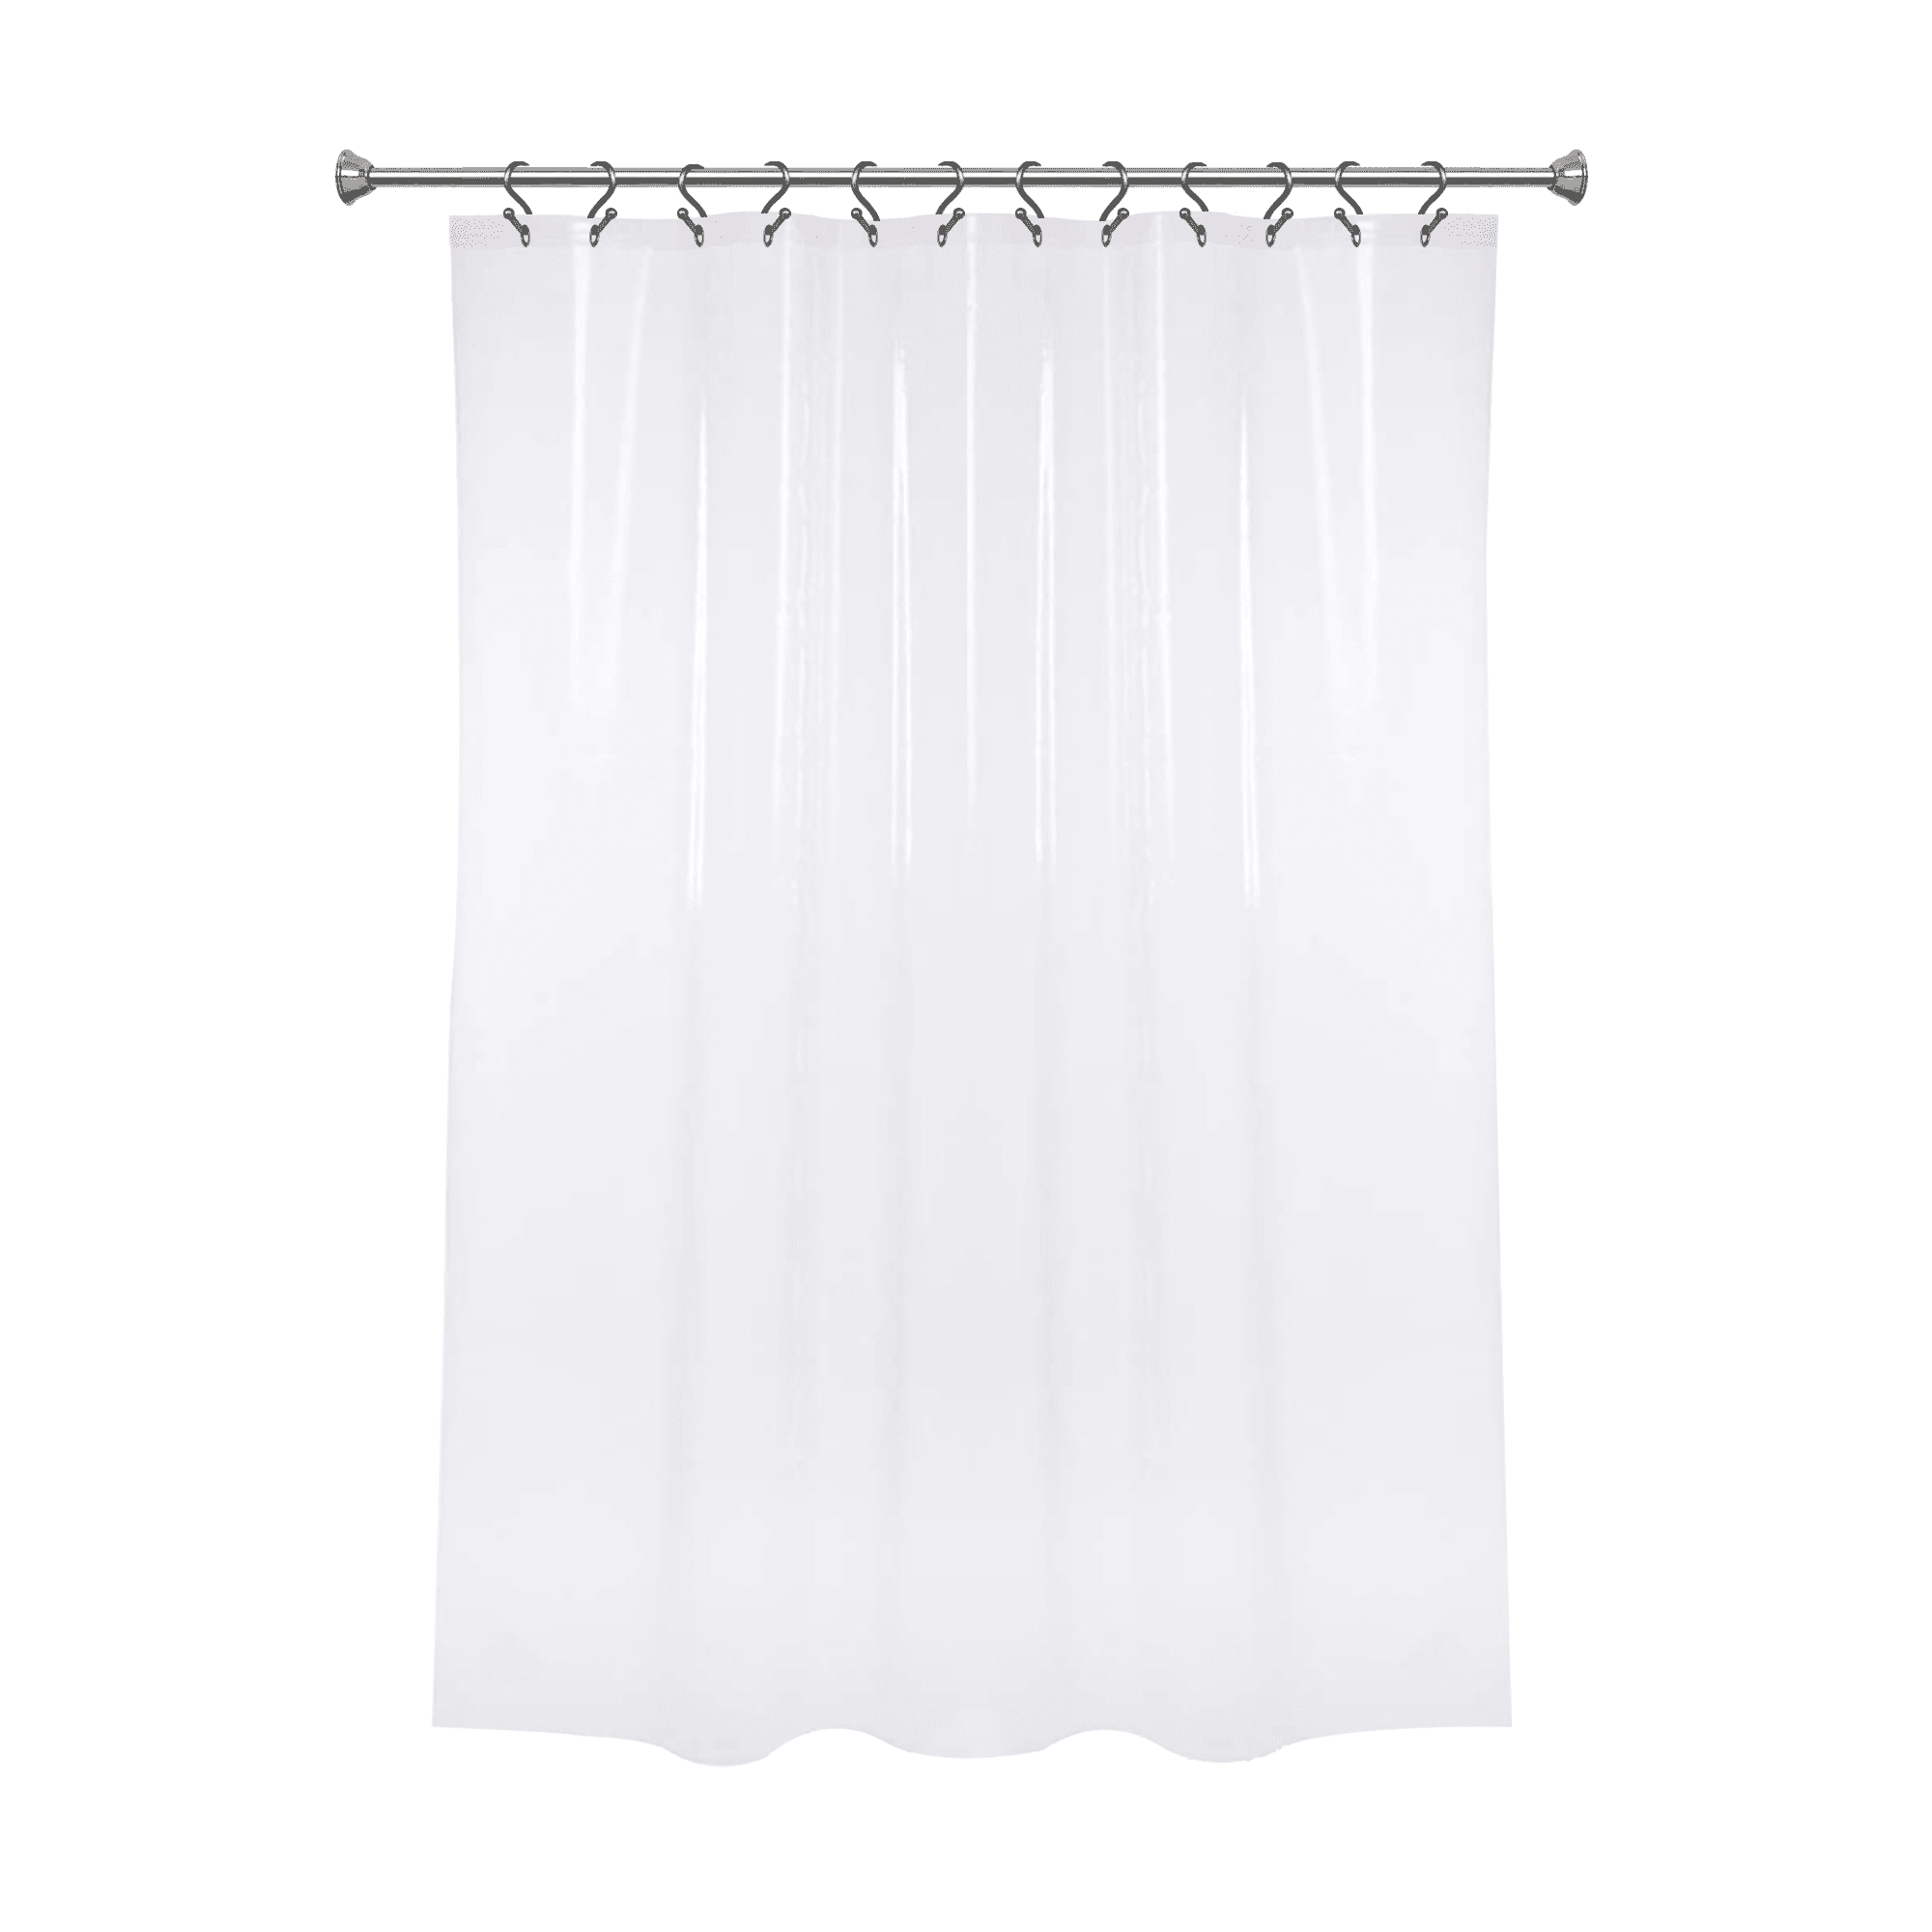 70" x 72", 5 G Clear Mildew Resistant Midweight PEVA Shower Curtain Liner 